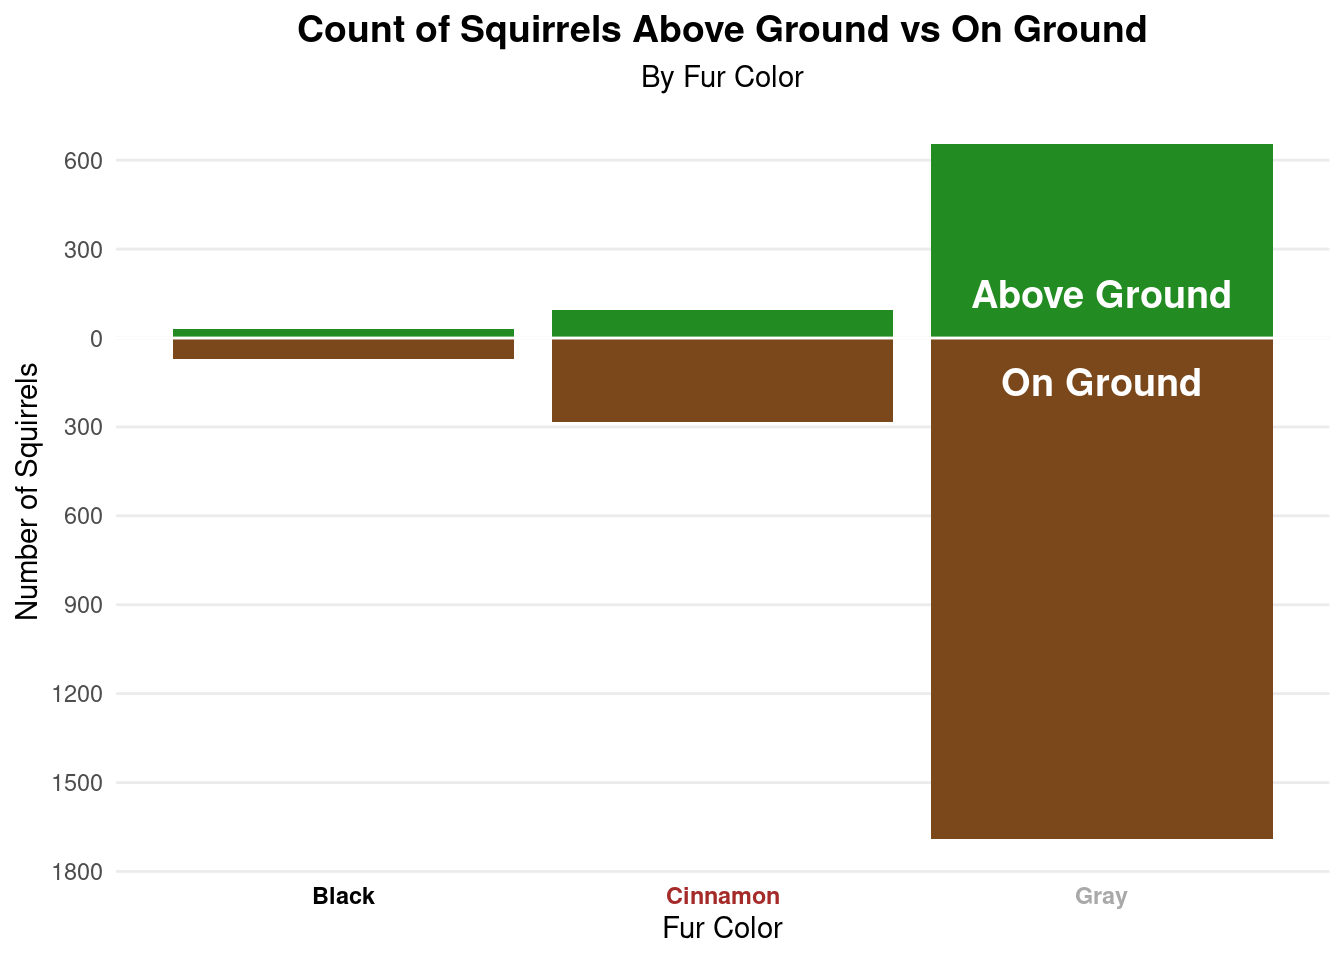 The bar chart, Count of Squirrels Above vs On Ground, displays the number of squirrels that were found residing on versus above ground, from -1600 to 800 on the y axis. It is grouped according to fur color (black, cinnamon, and gray). The visualization shows that squirrels are more likely to reside on ground than above regardless of fur color. It also points to the number of gray squirrels there are in comparison to black and cinnamon squirrels, with black being the least cited."